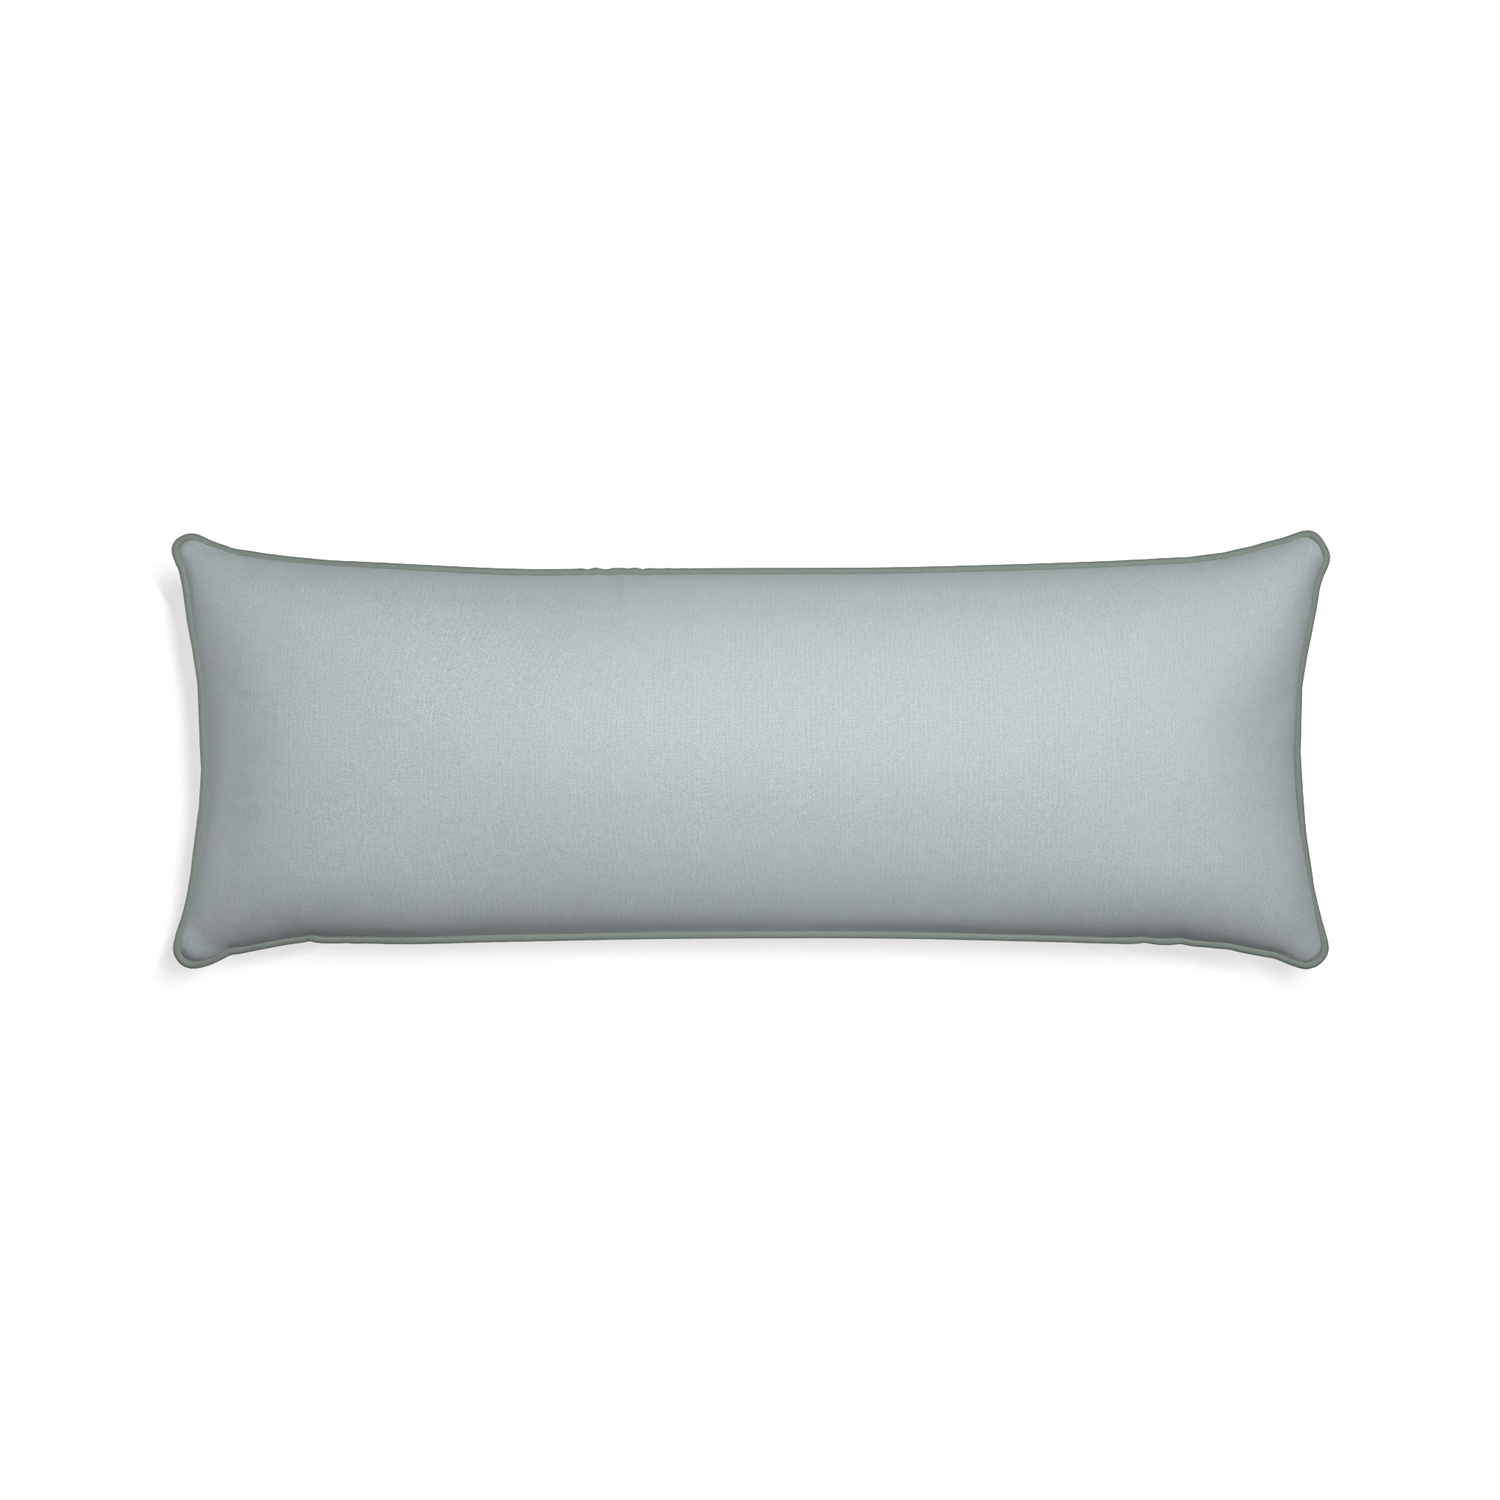 Xl-lumbar sea custom grey bluepillow with sage piping on white background